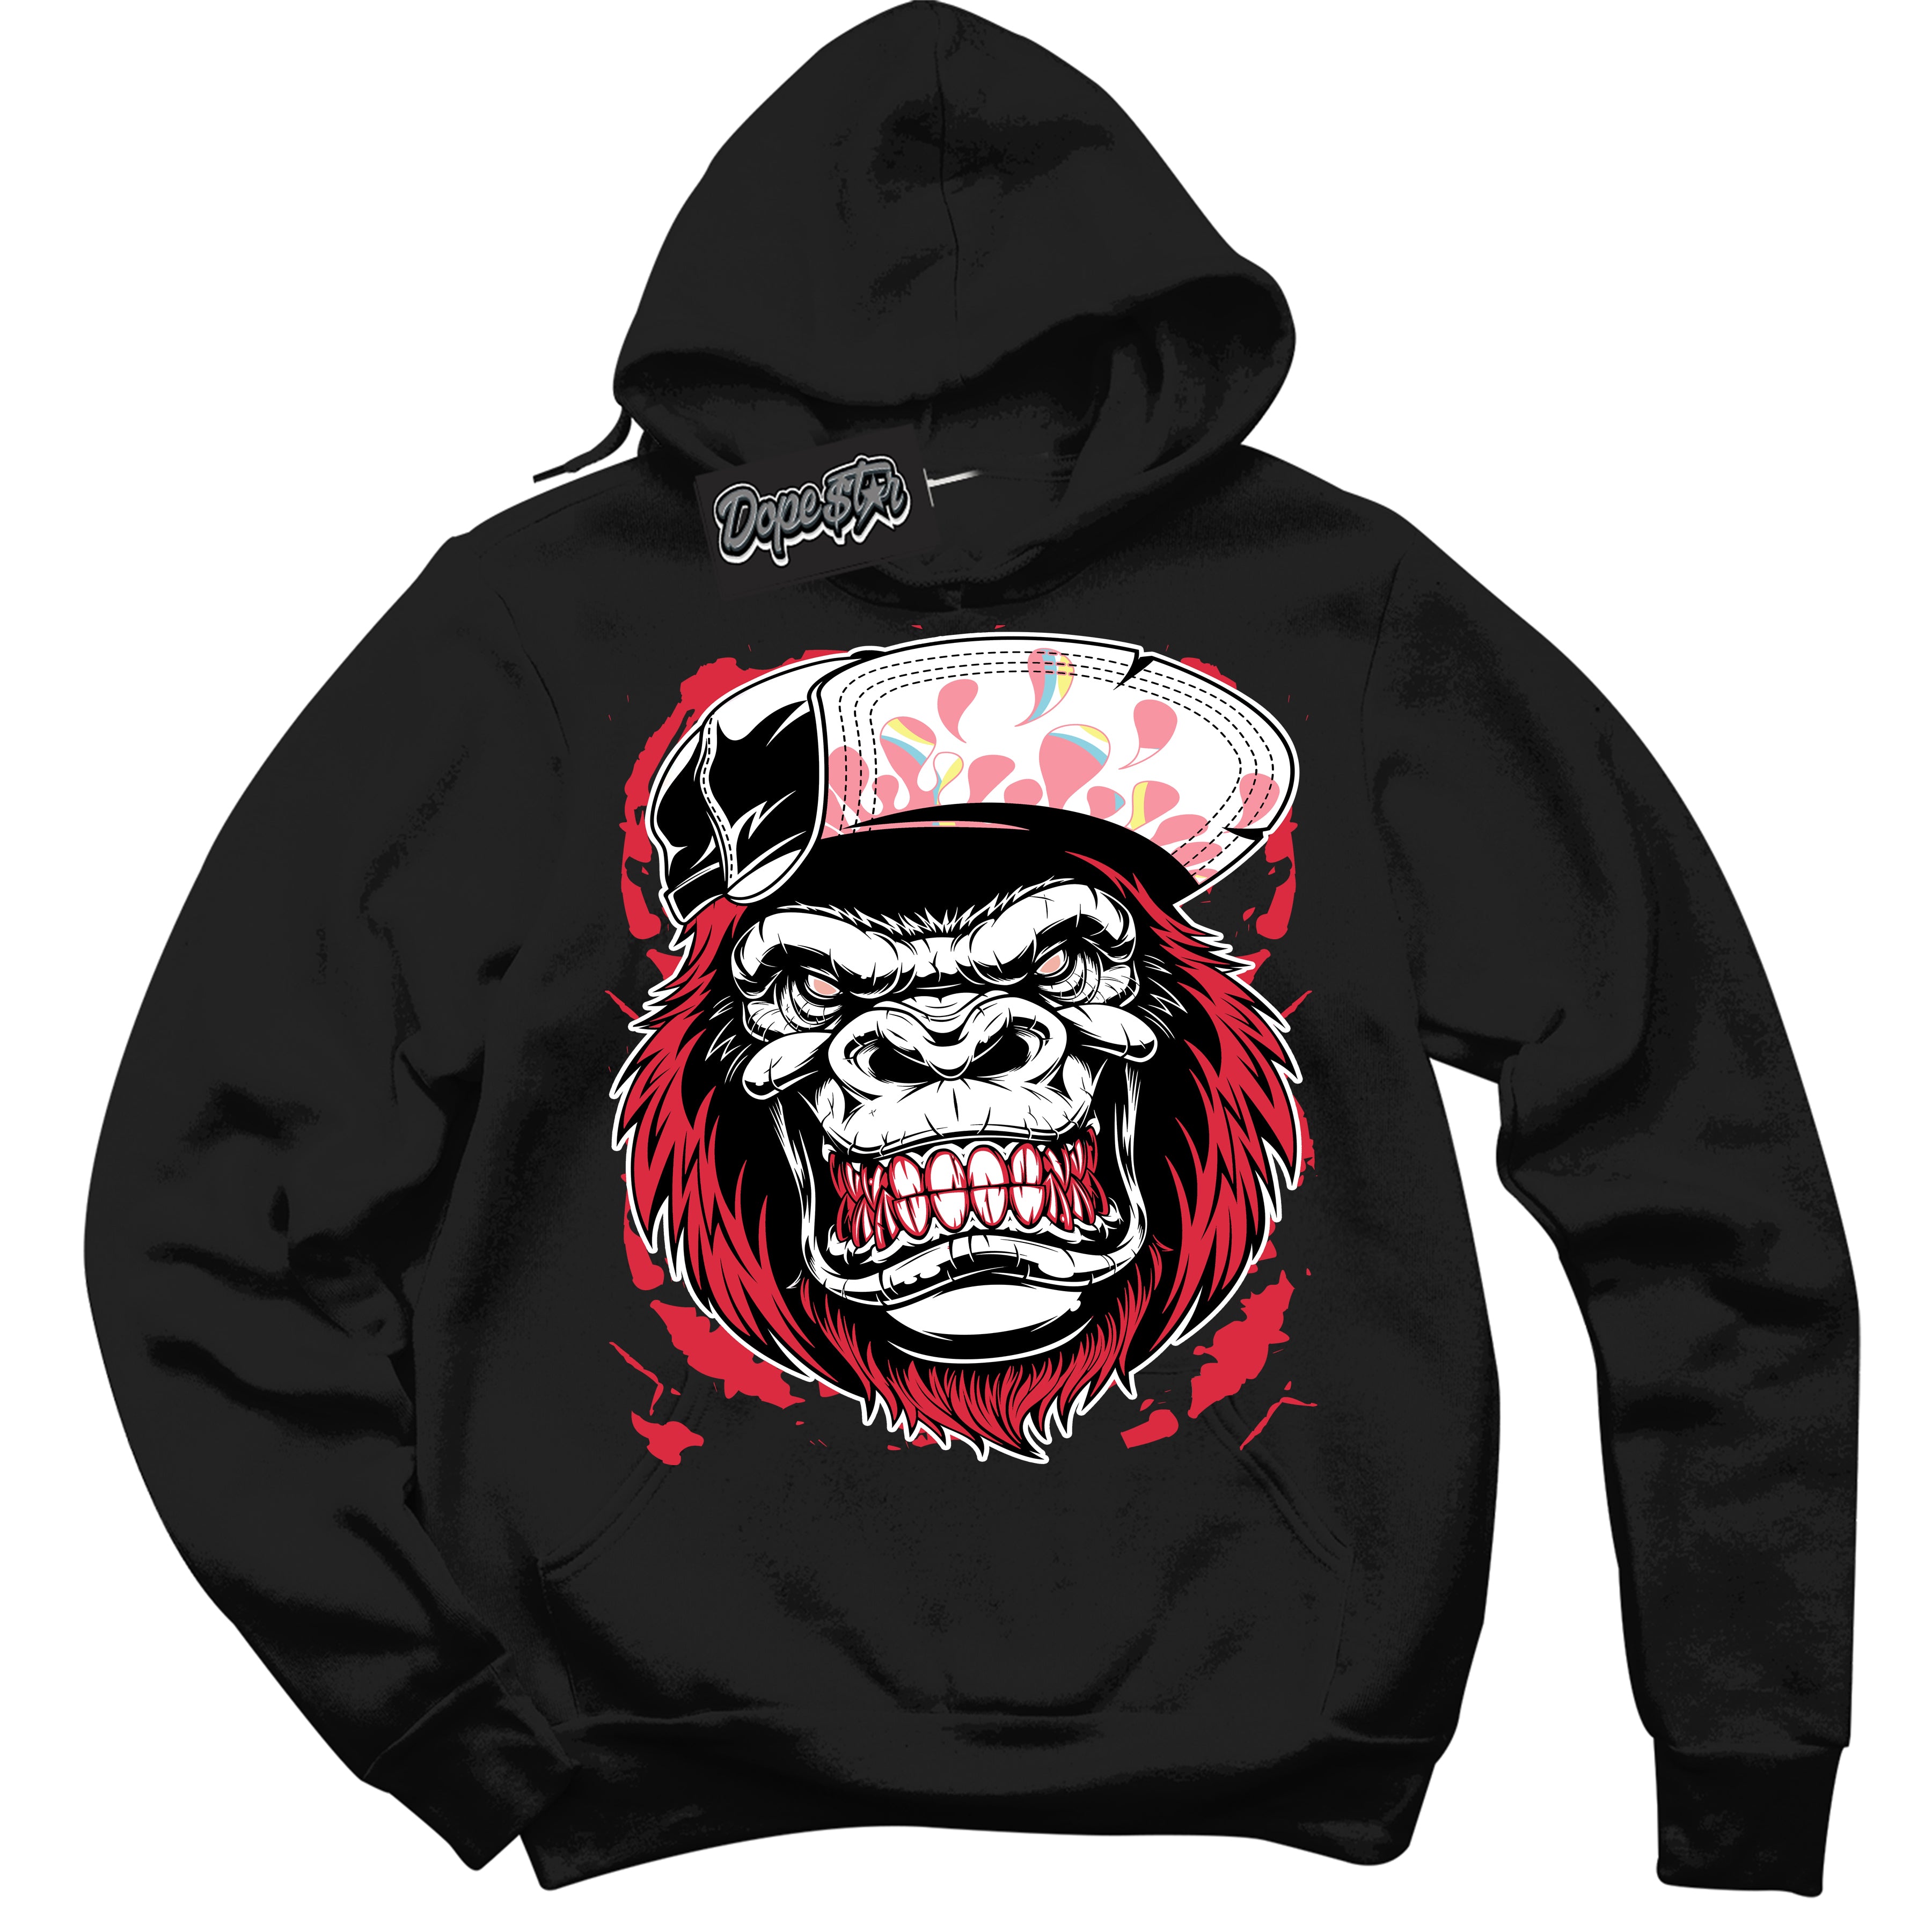 Cool Black Graphic DopeStar Hoodie with “ Gorilla Beast “ print, that perfectly matches Spider-Verse 1s sneakers